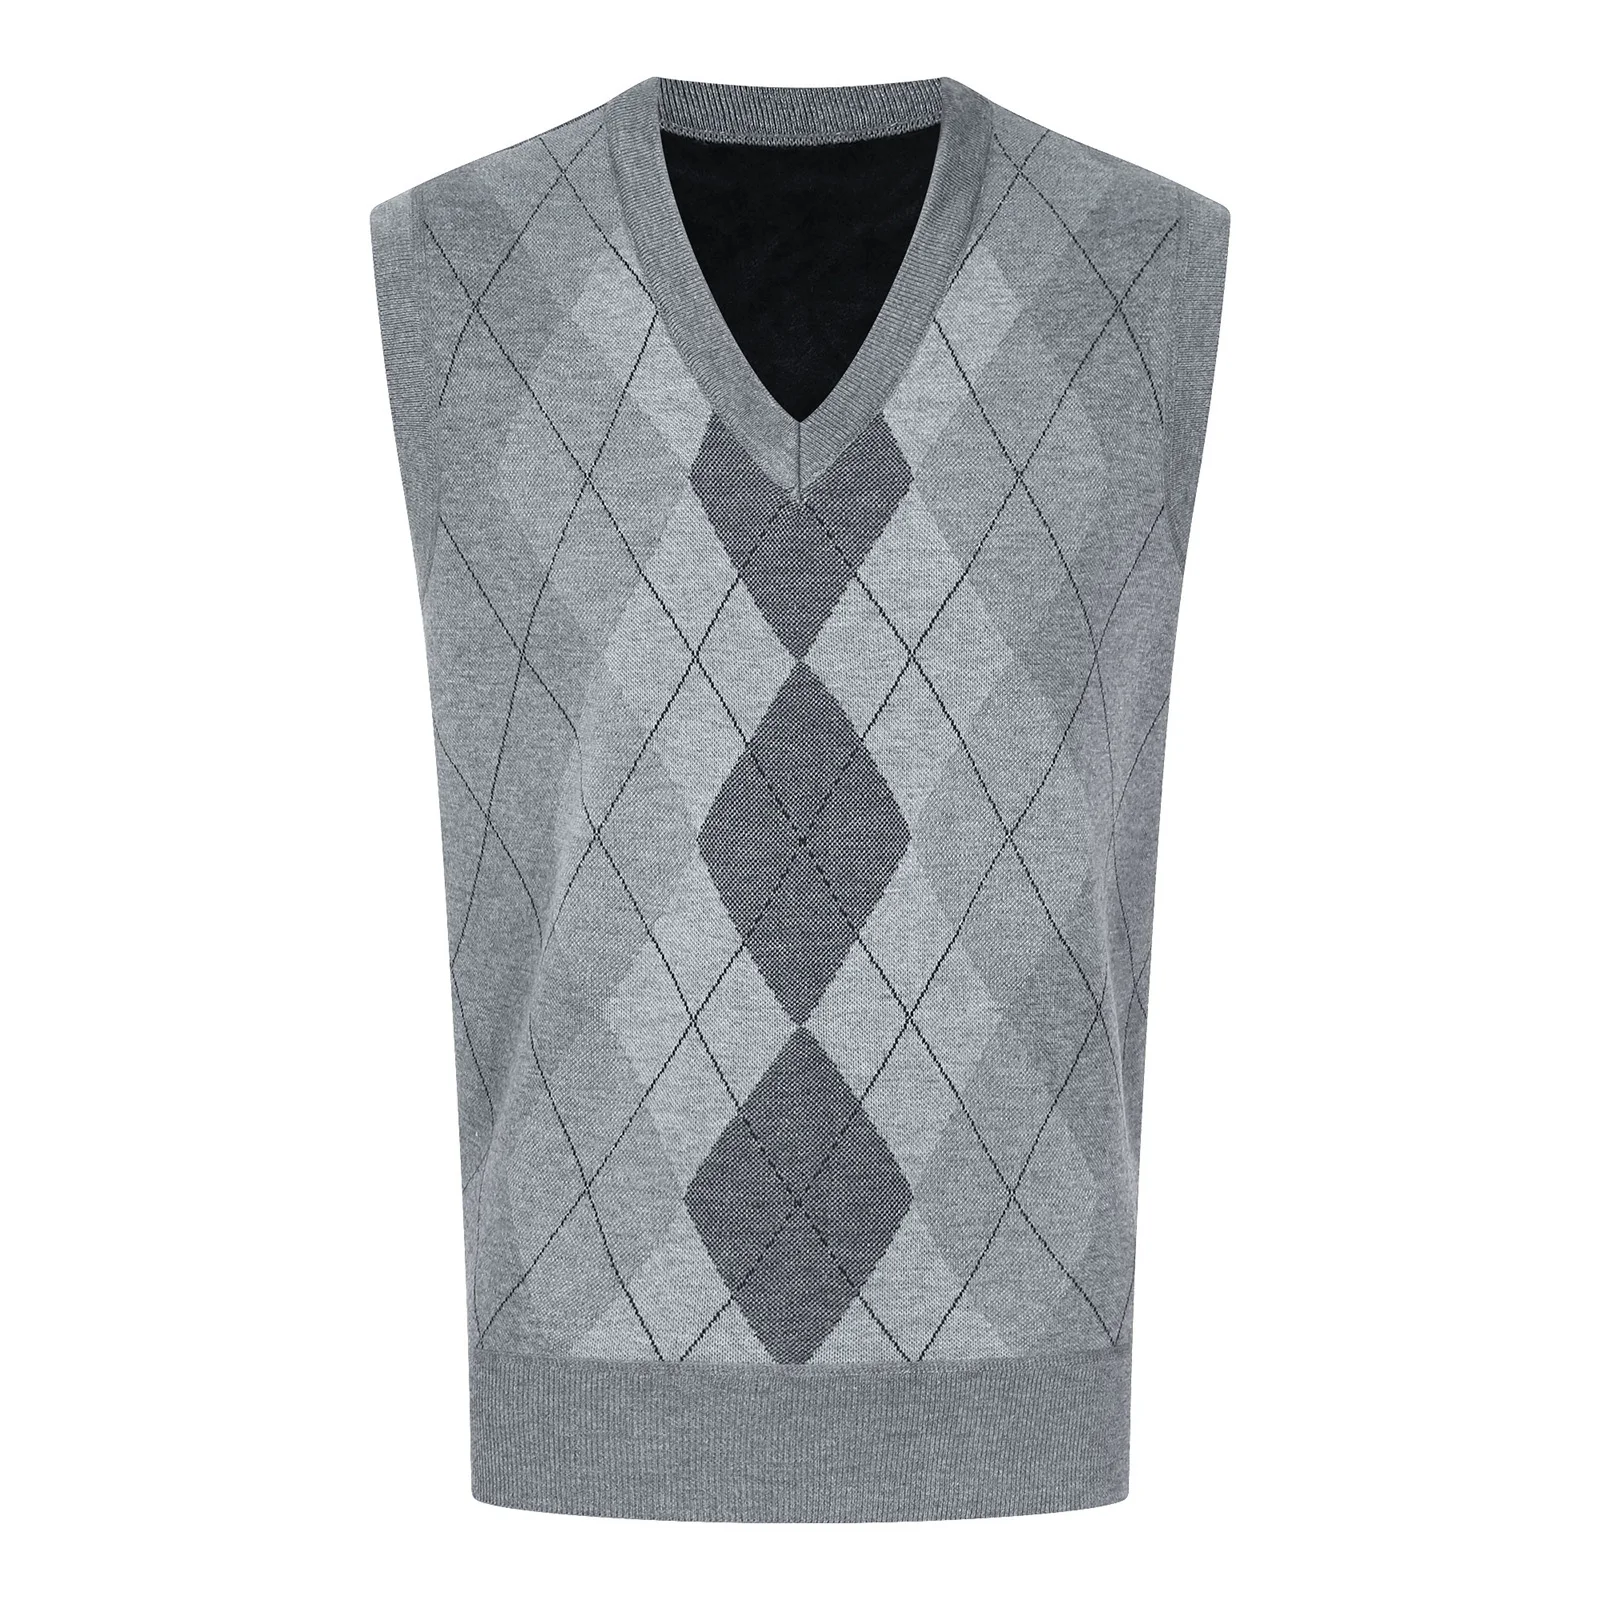 

Mens Argyle Fleece Lined Sweater Vest Knitwear Contrast Color V Neck Sleeveless Knitted Pullover for Work Office Holiday Travel